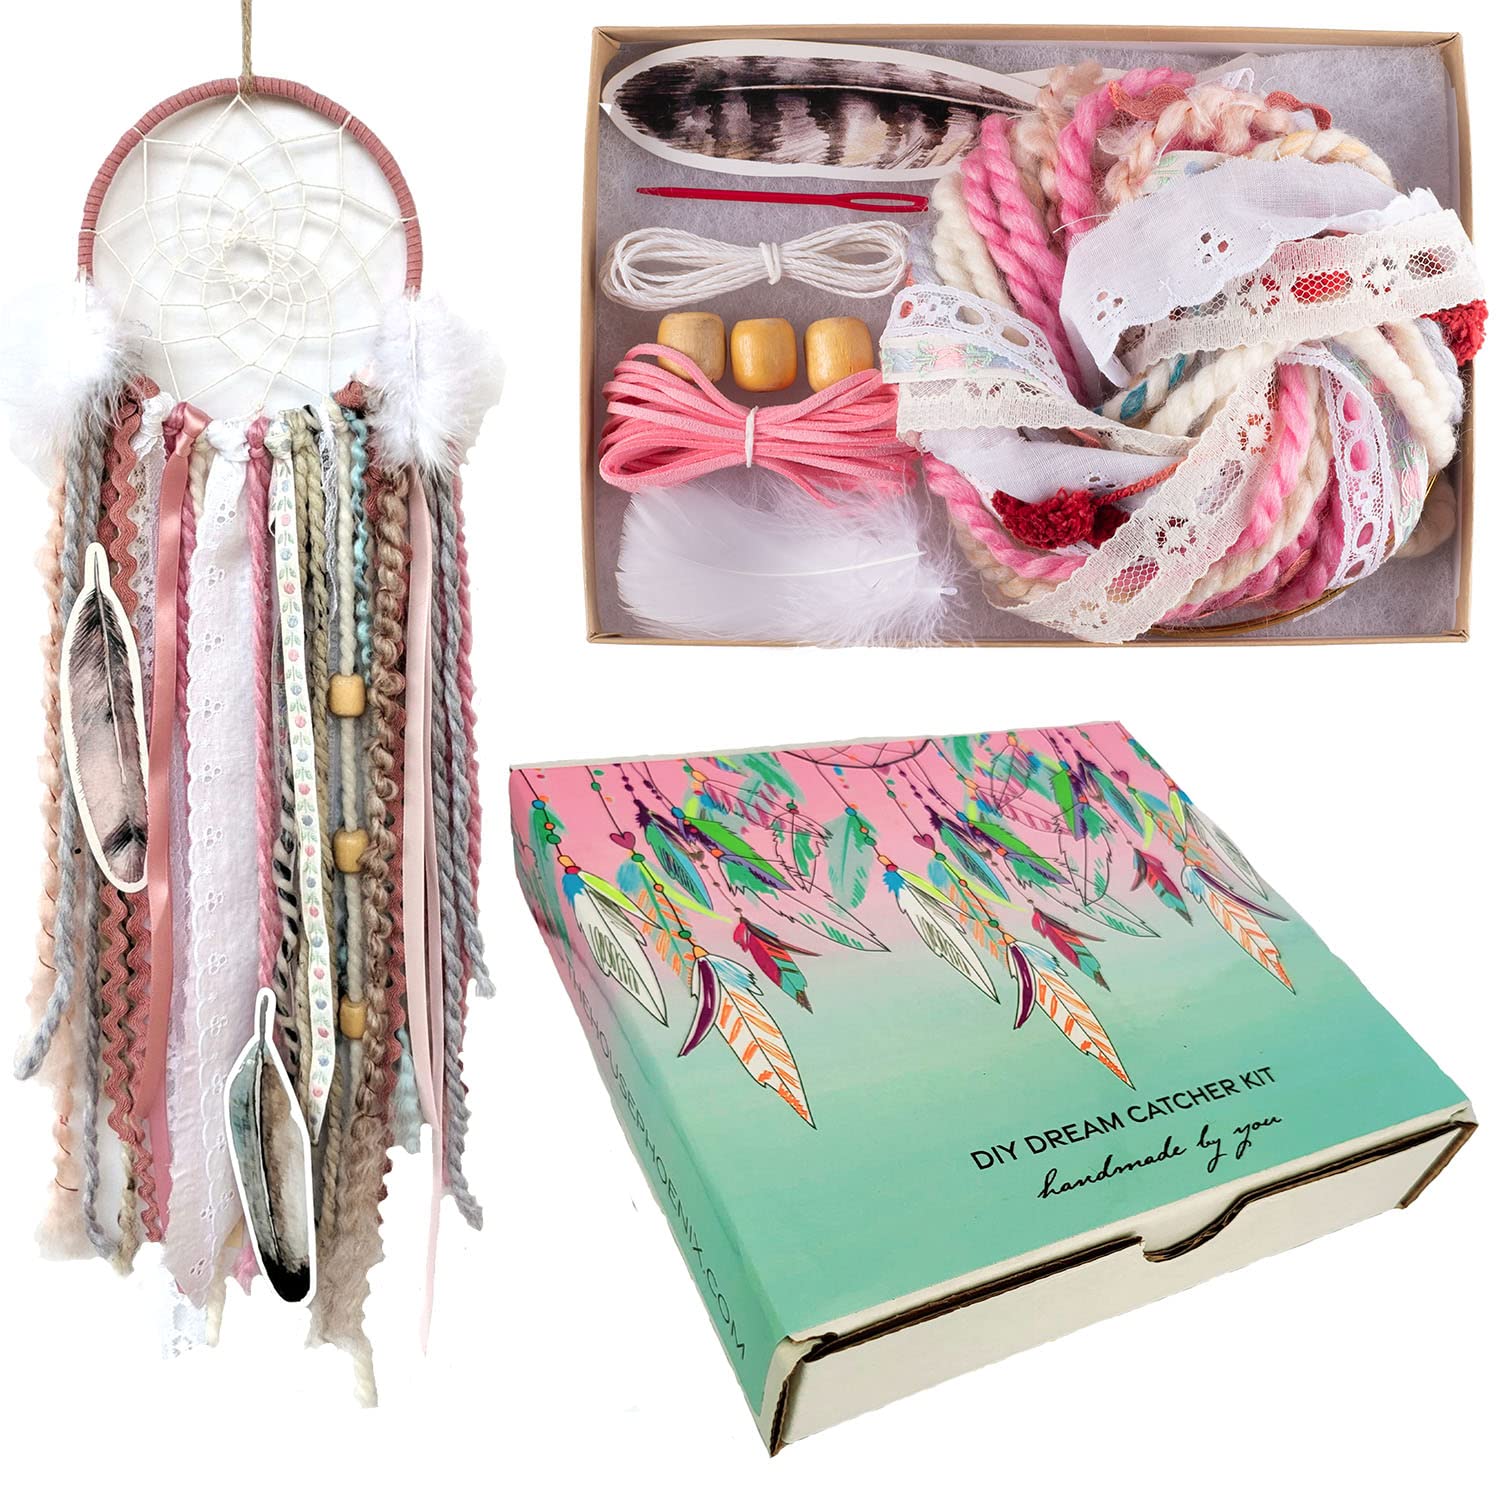 Book Cover DIY Dream Catcher Kit Stocking Stuffer for Kids Adults Bohemian Decor Pink Craft Project Make Your Own Dreamcatcher Girls Birthday Gift 5 Inch Ring